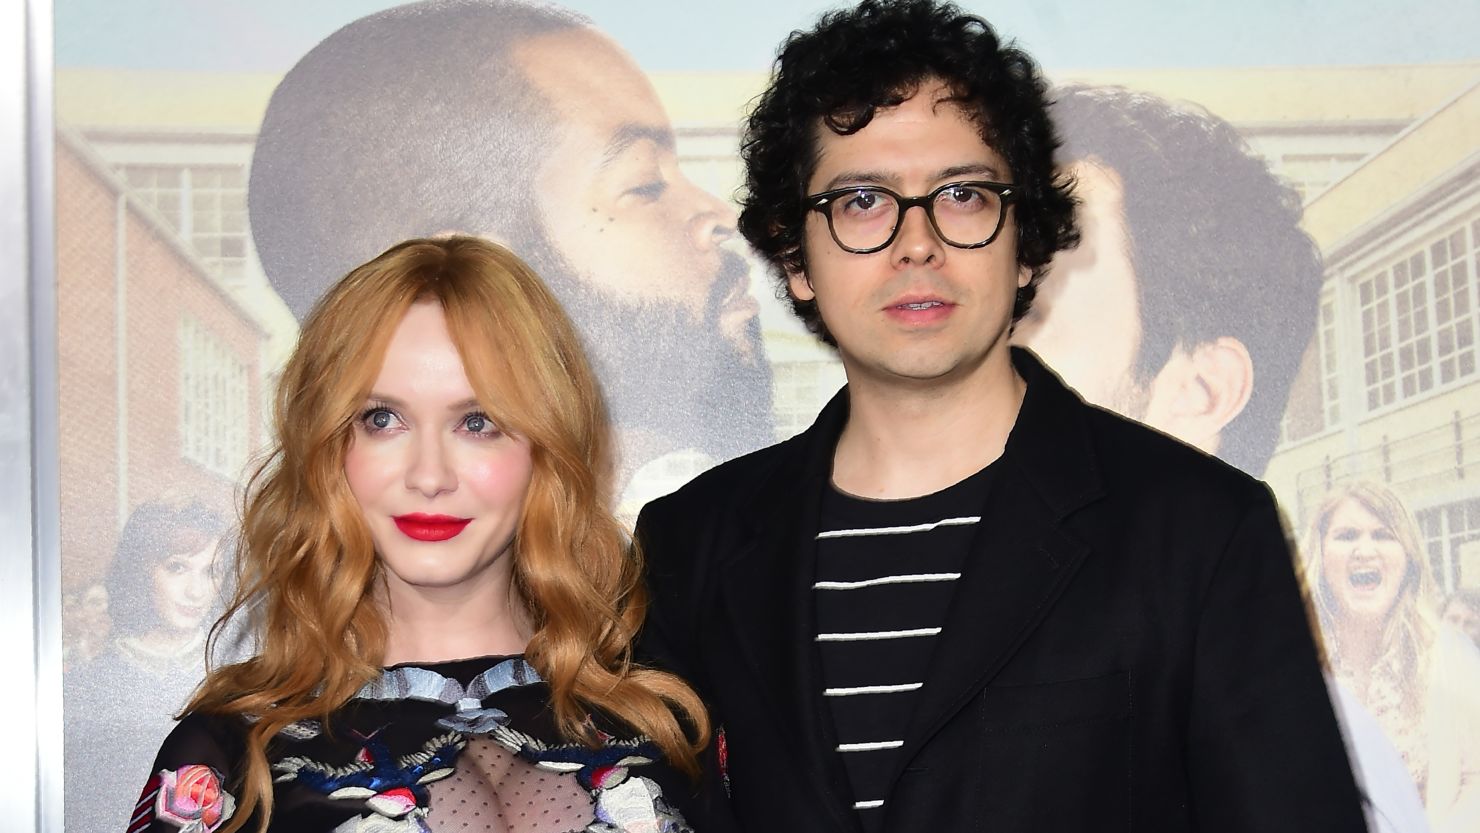 Christina Hendricks arrives with Geoffrey Arend for the world premiere of the film "Fist Fight" in Los Angeles, California, on February 13, 2017. 